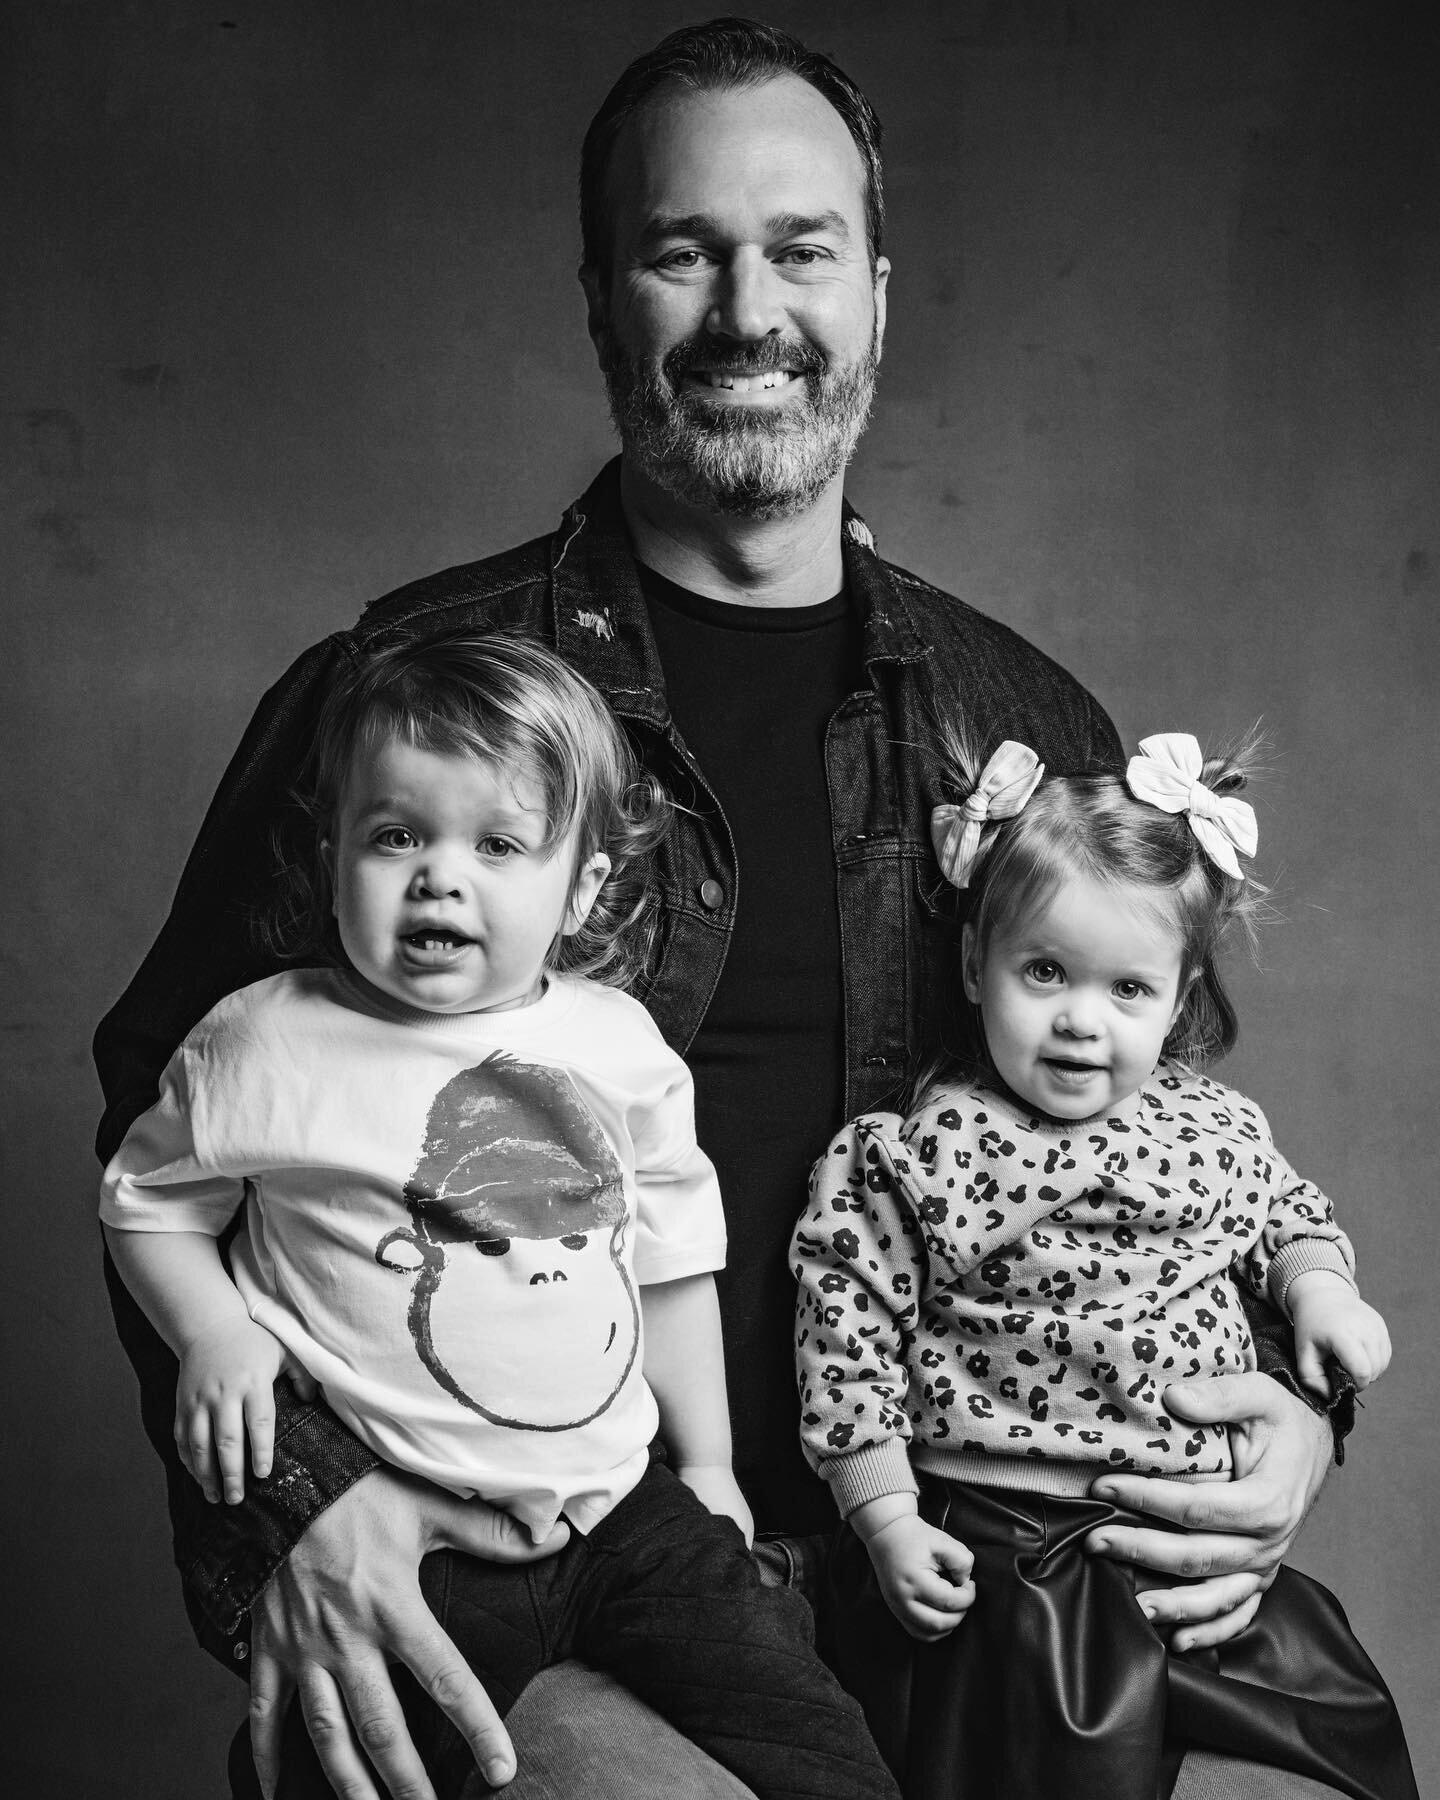 If anyone knows the effort and struggle it takes to get a good photo of your loved ones, it&rsquo;s me!! Here&rsquo;s my husband and my twin toddlers! And boy this was a total doozy! Don&rsquo;t miss out on memories with you family because it&rsquo;s